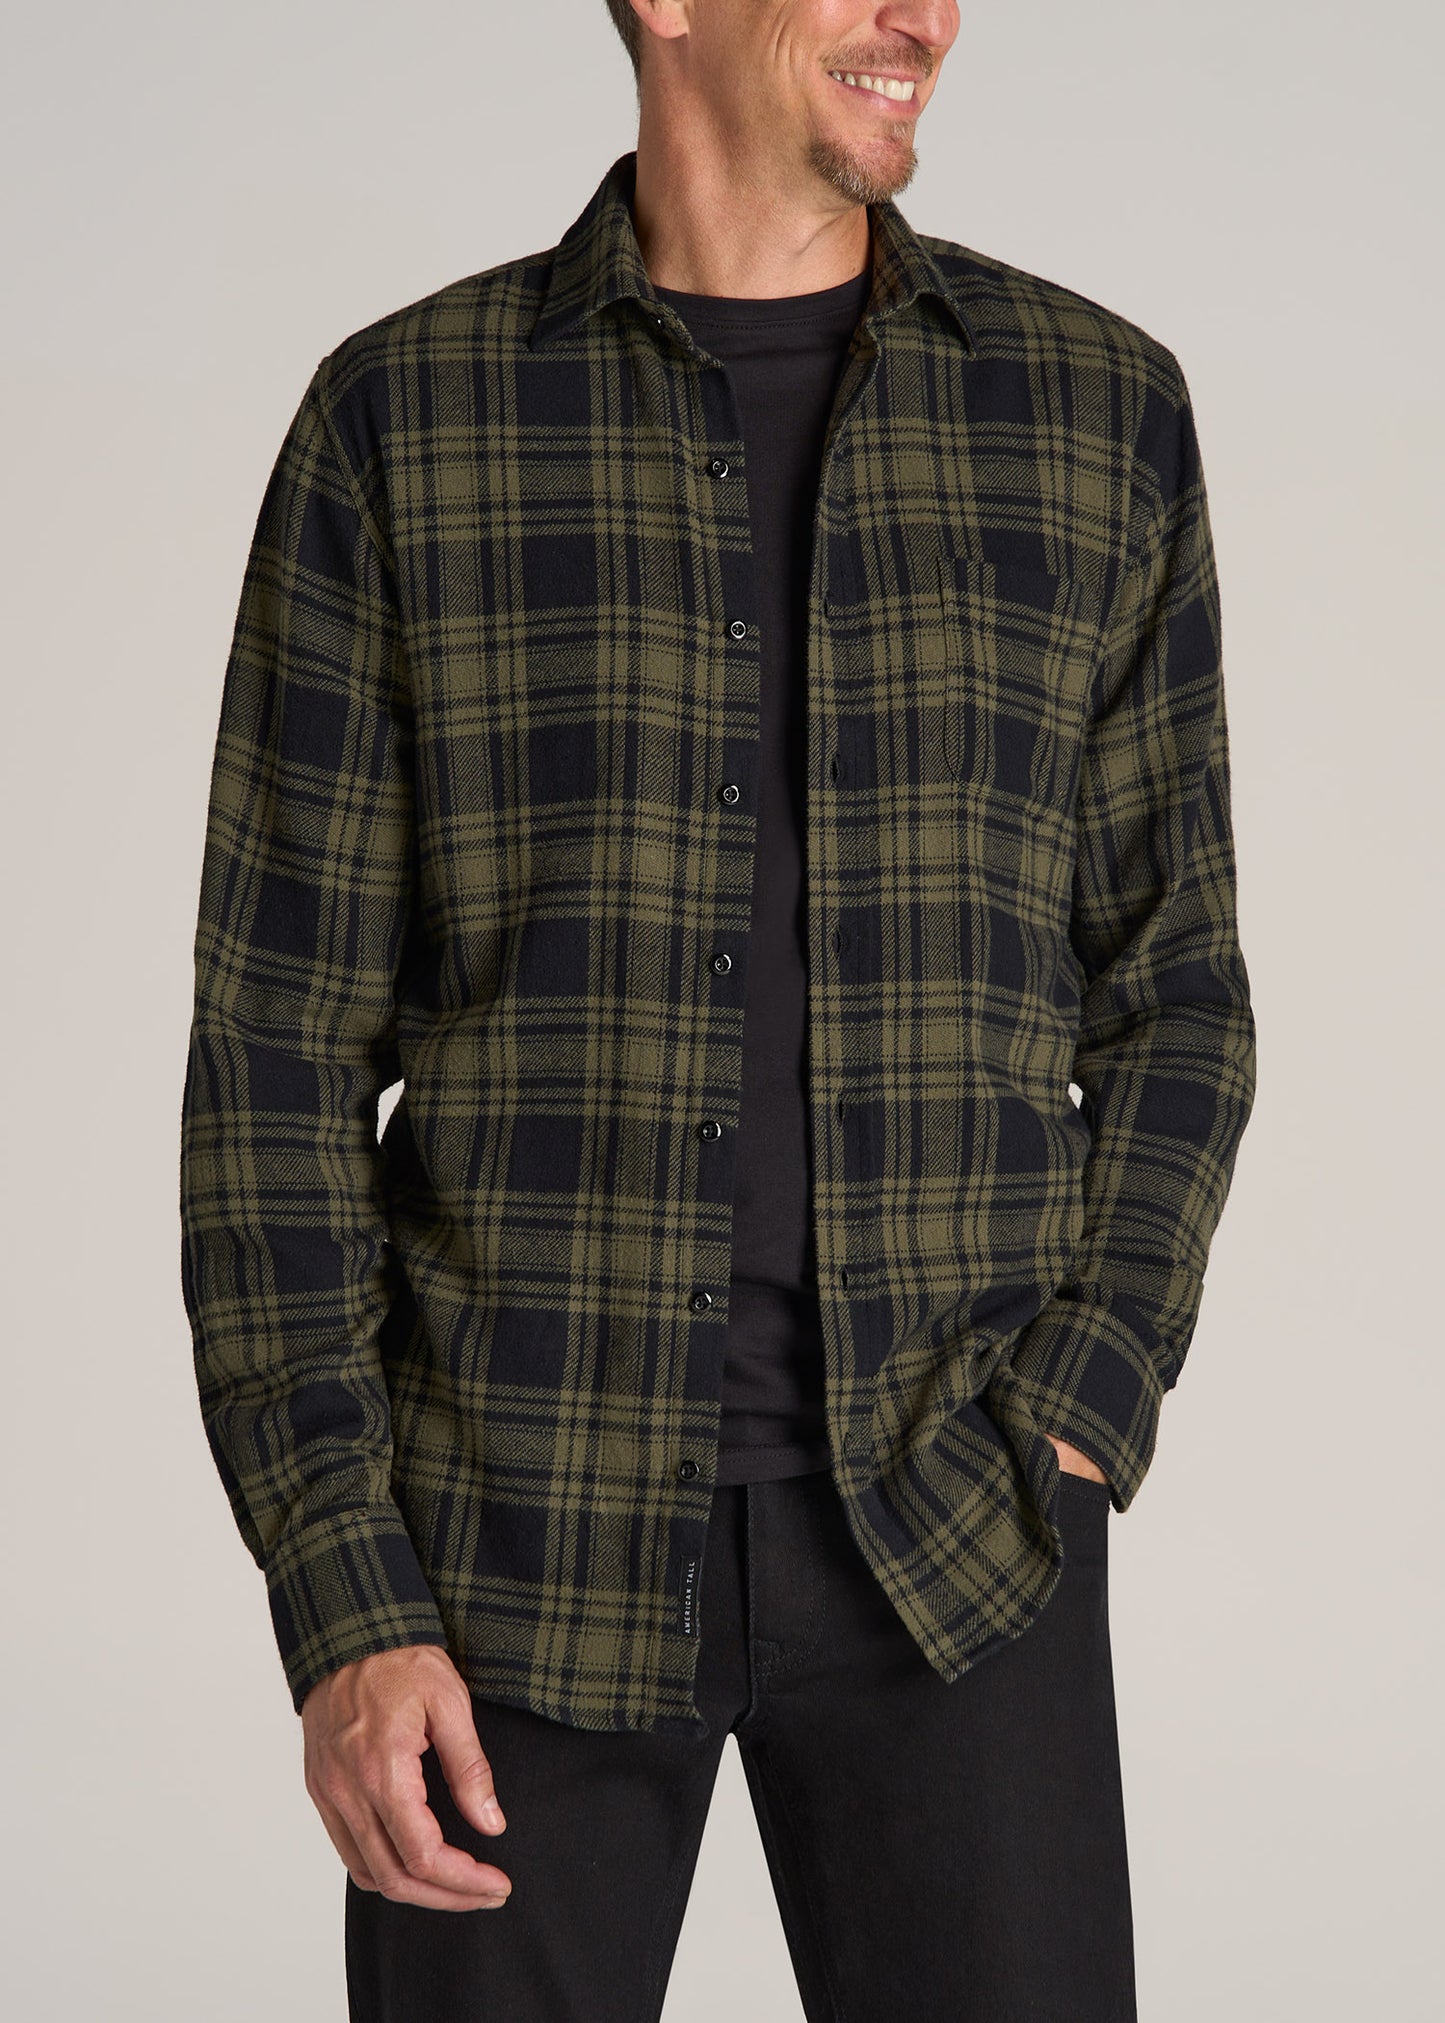 Tall guy wearing American Tall's Nelson Flannel Shirt in Black and Green Plaid.